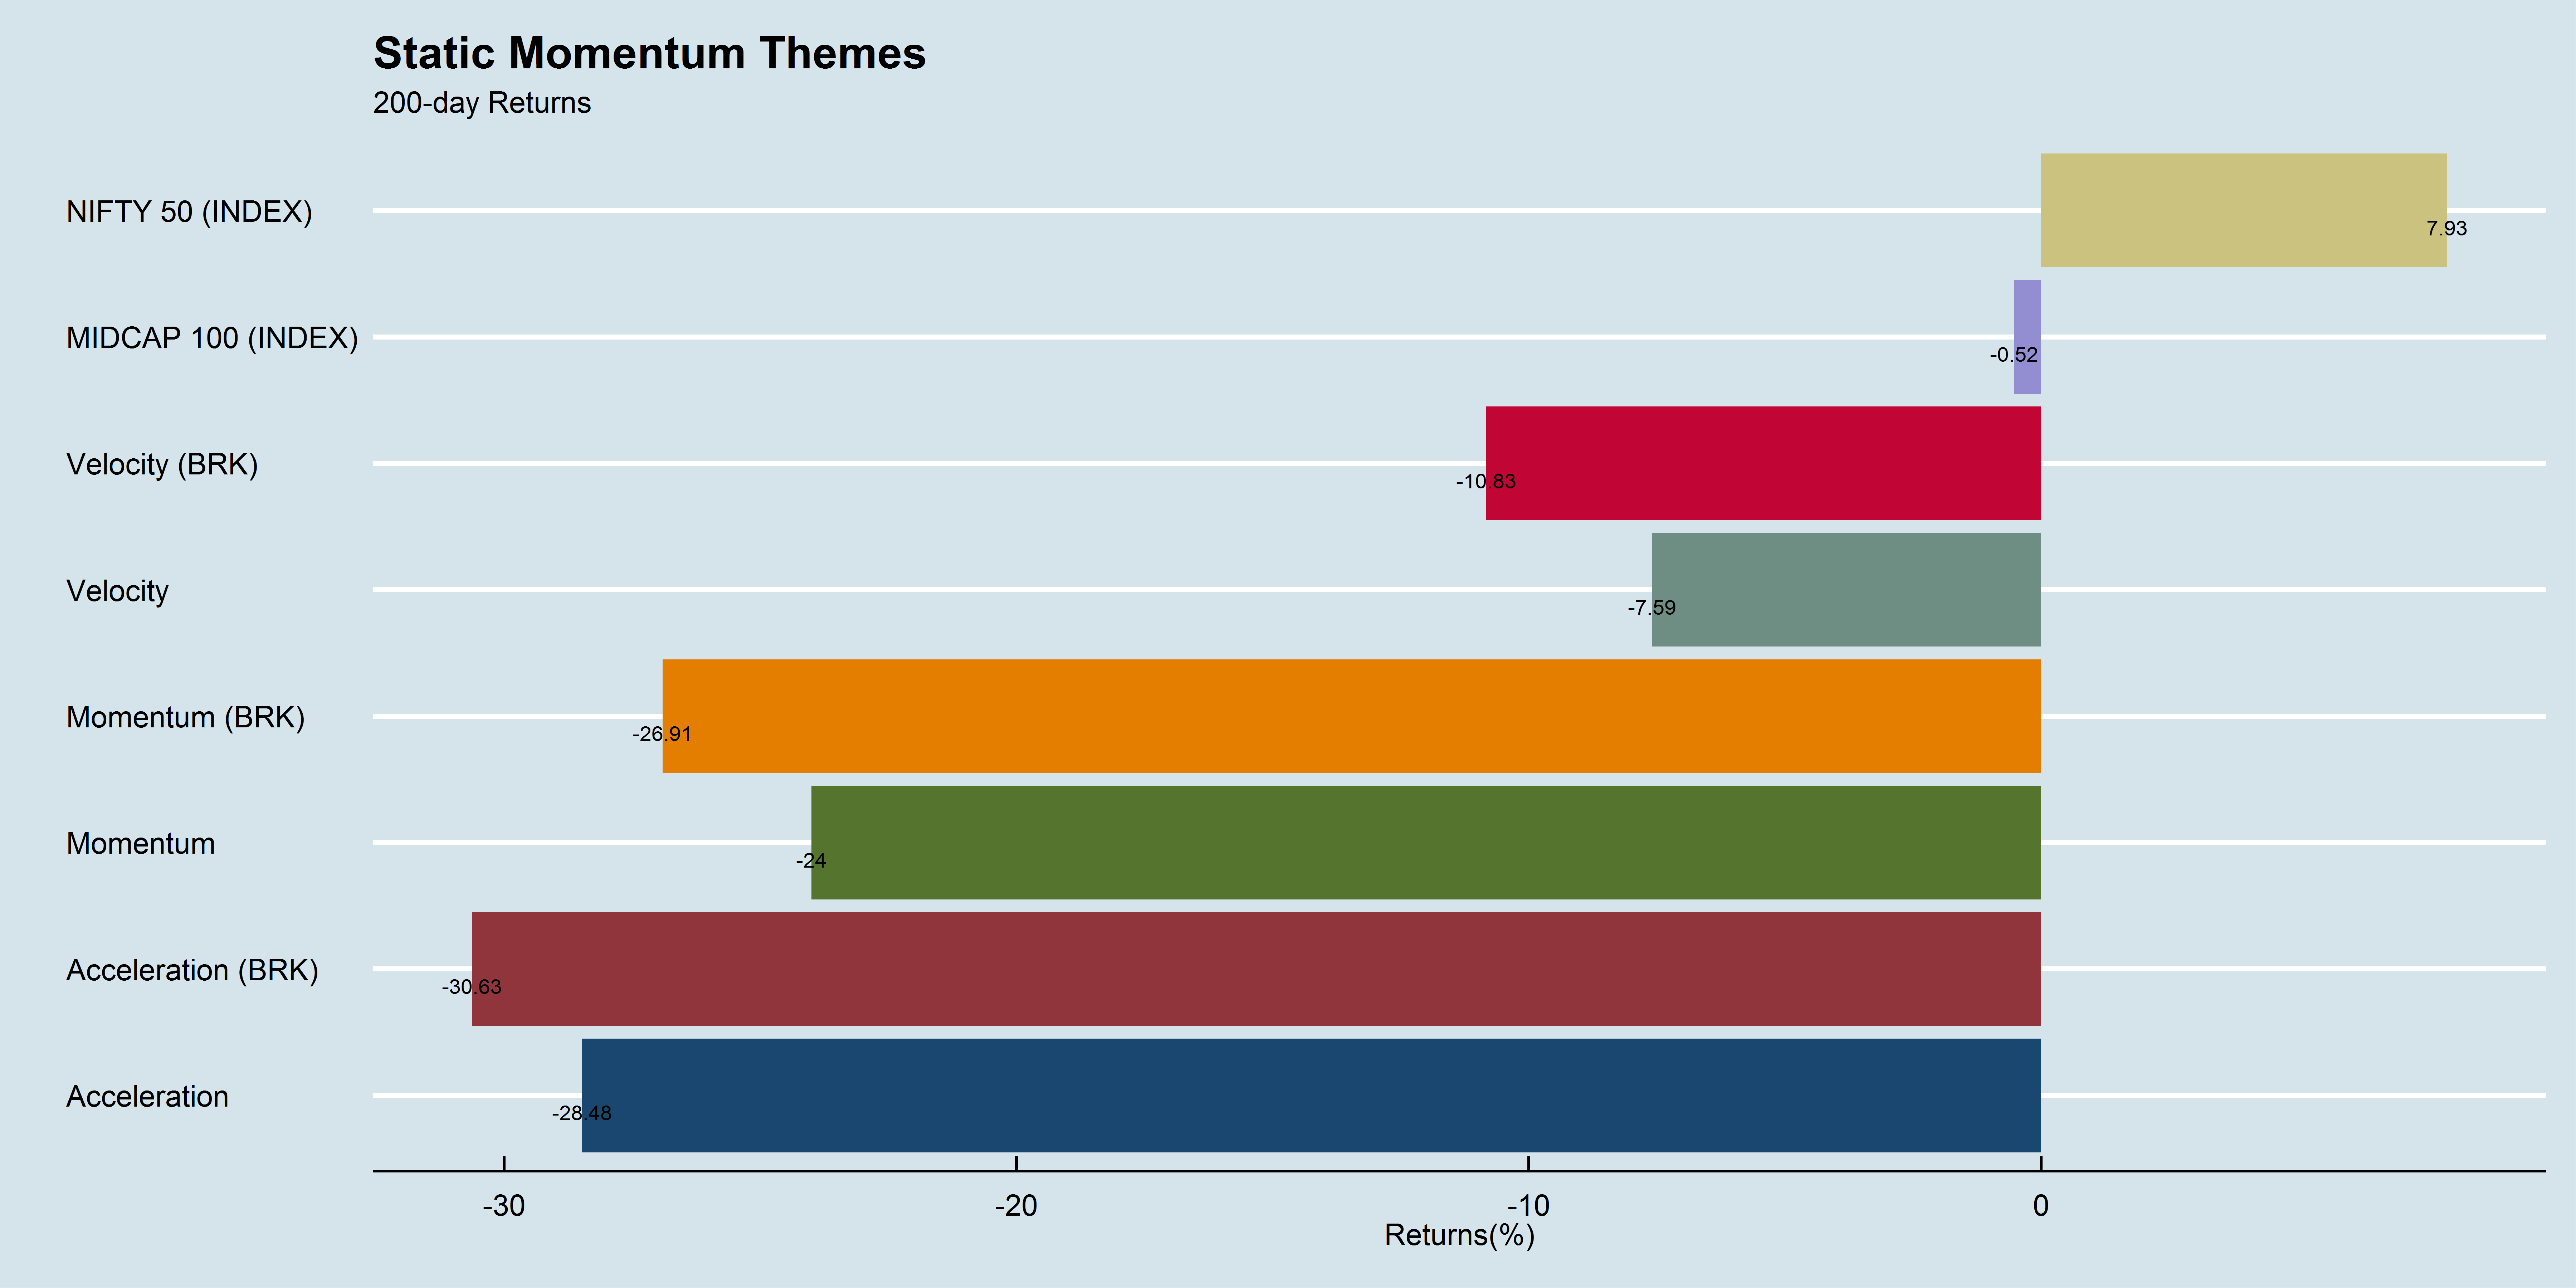 Static Momentum Themes 200-day performance